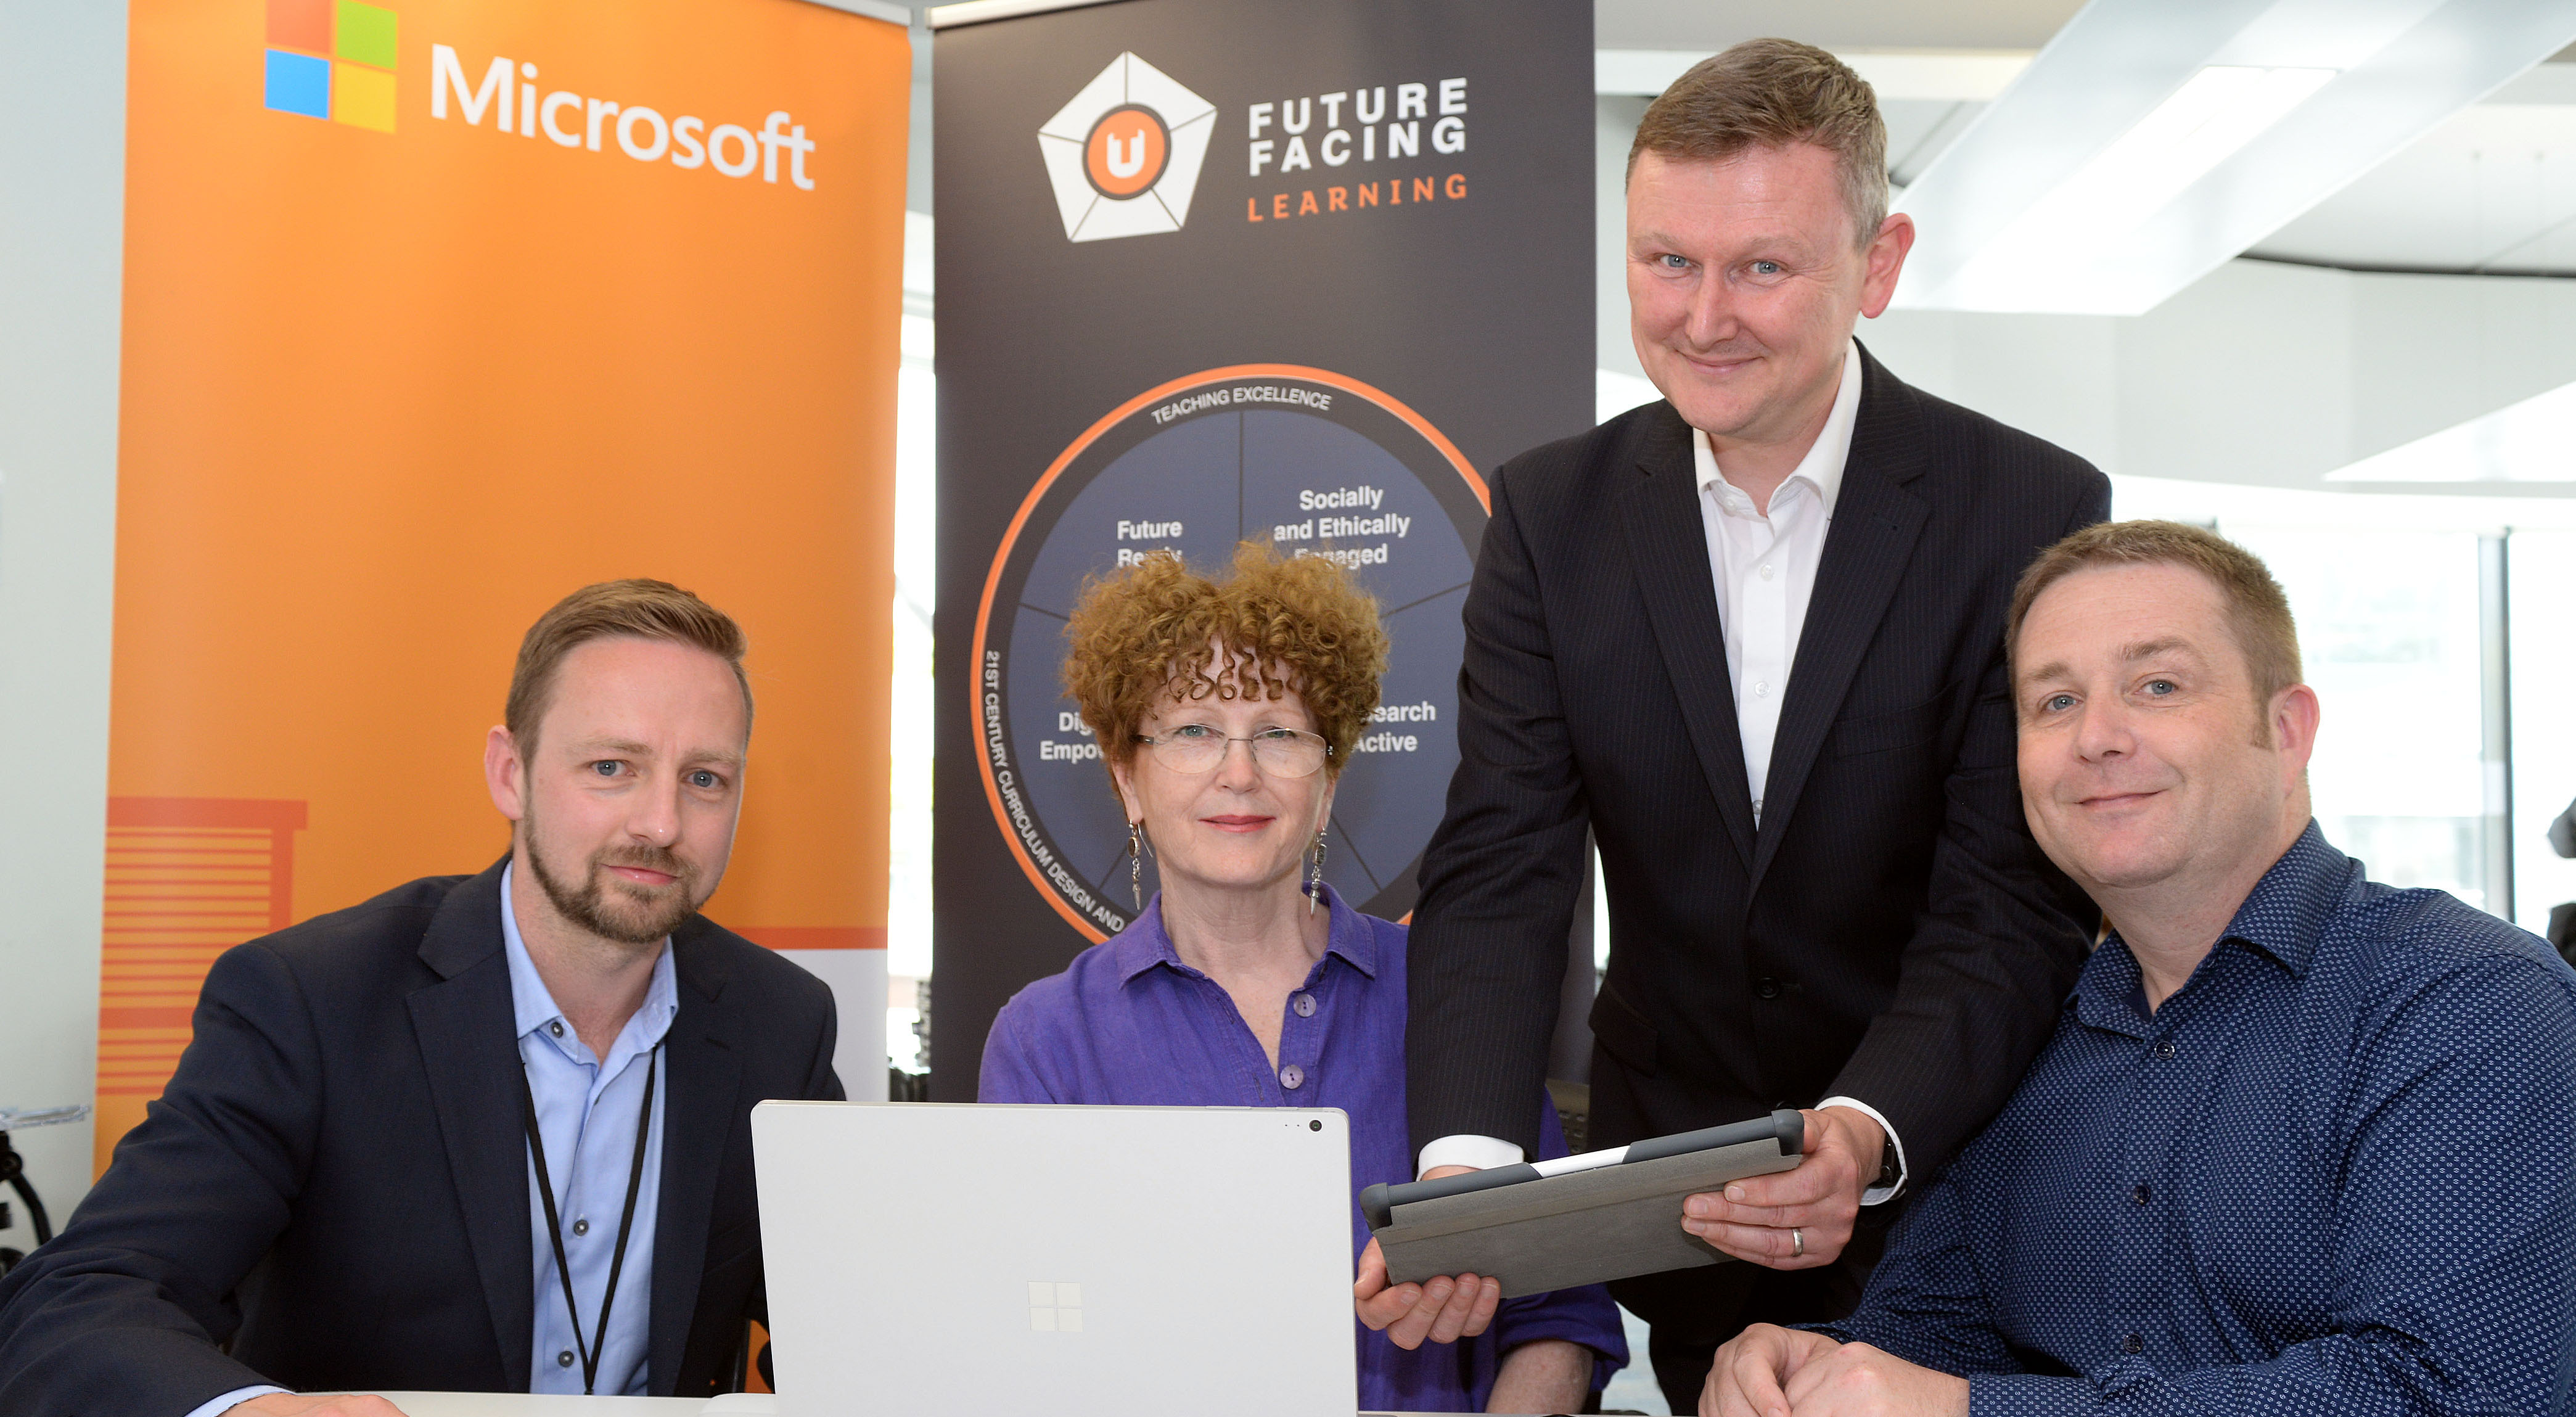 Paul Durston, Digital Learning Manager at Teesside University, Claire Riley, FE and HE Engagement Manager for Microsoft in the UK, Dr Steve Bunce, Professional Learning Specialist at XMA and David Wright, Microsoft Specialist at XMA.